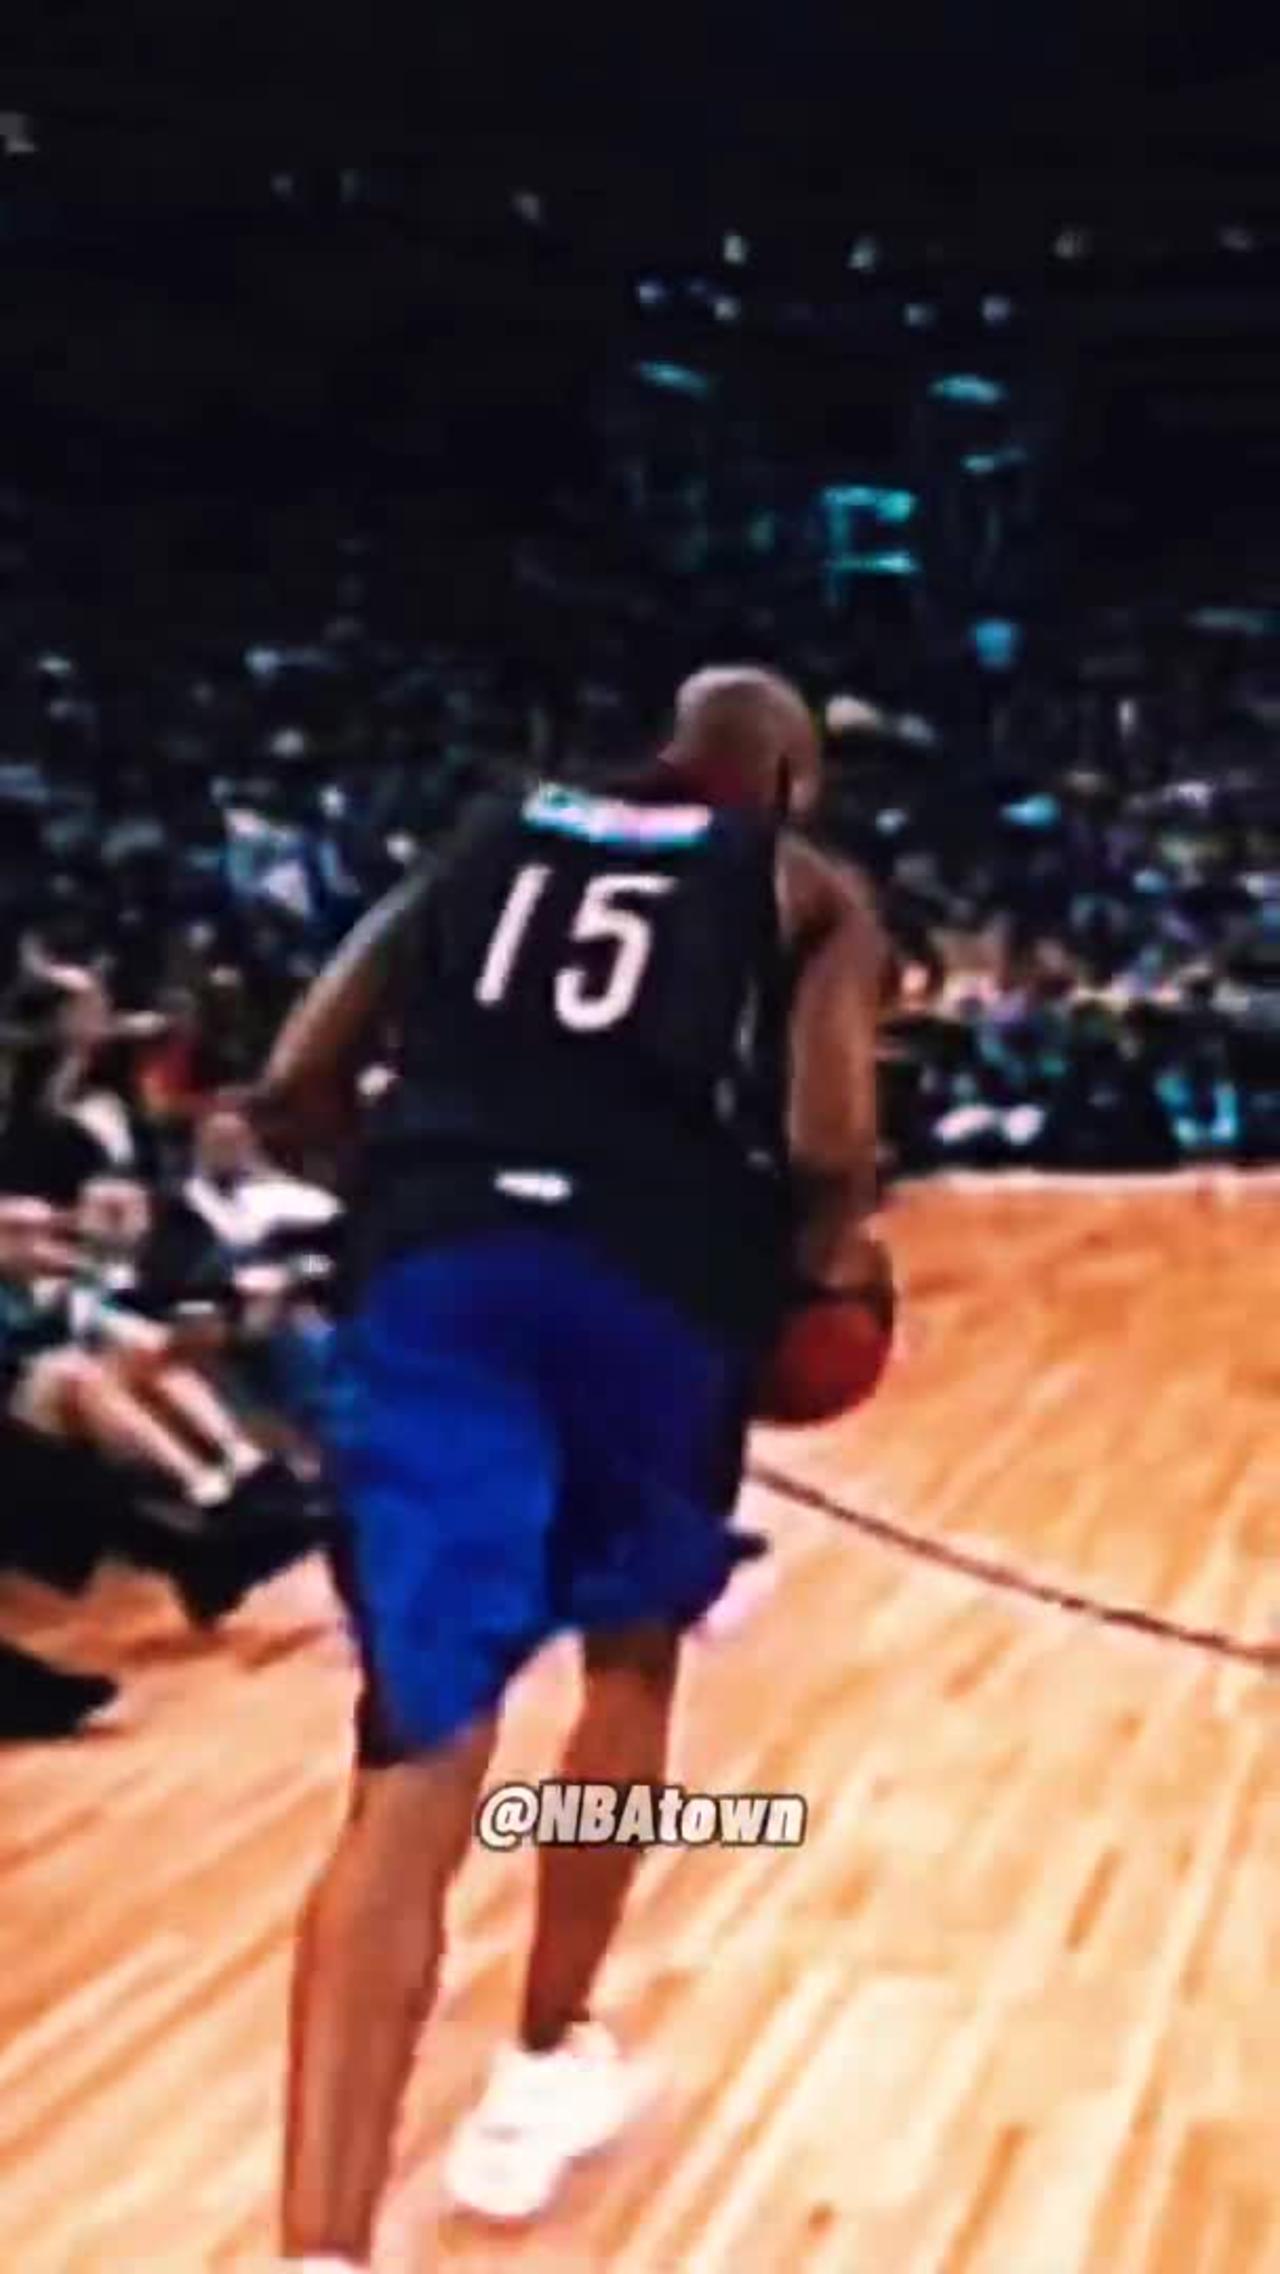 Vince Carter’s famous 360 windmill dunk in the 2000 NBA Slam Dunk Contest 😳🔥 #shorts #nba